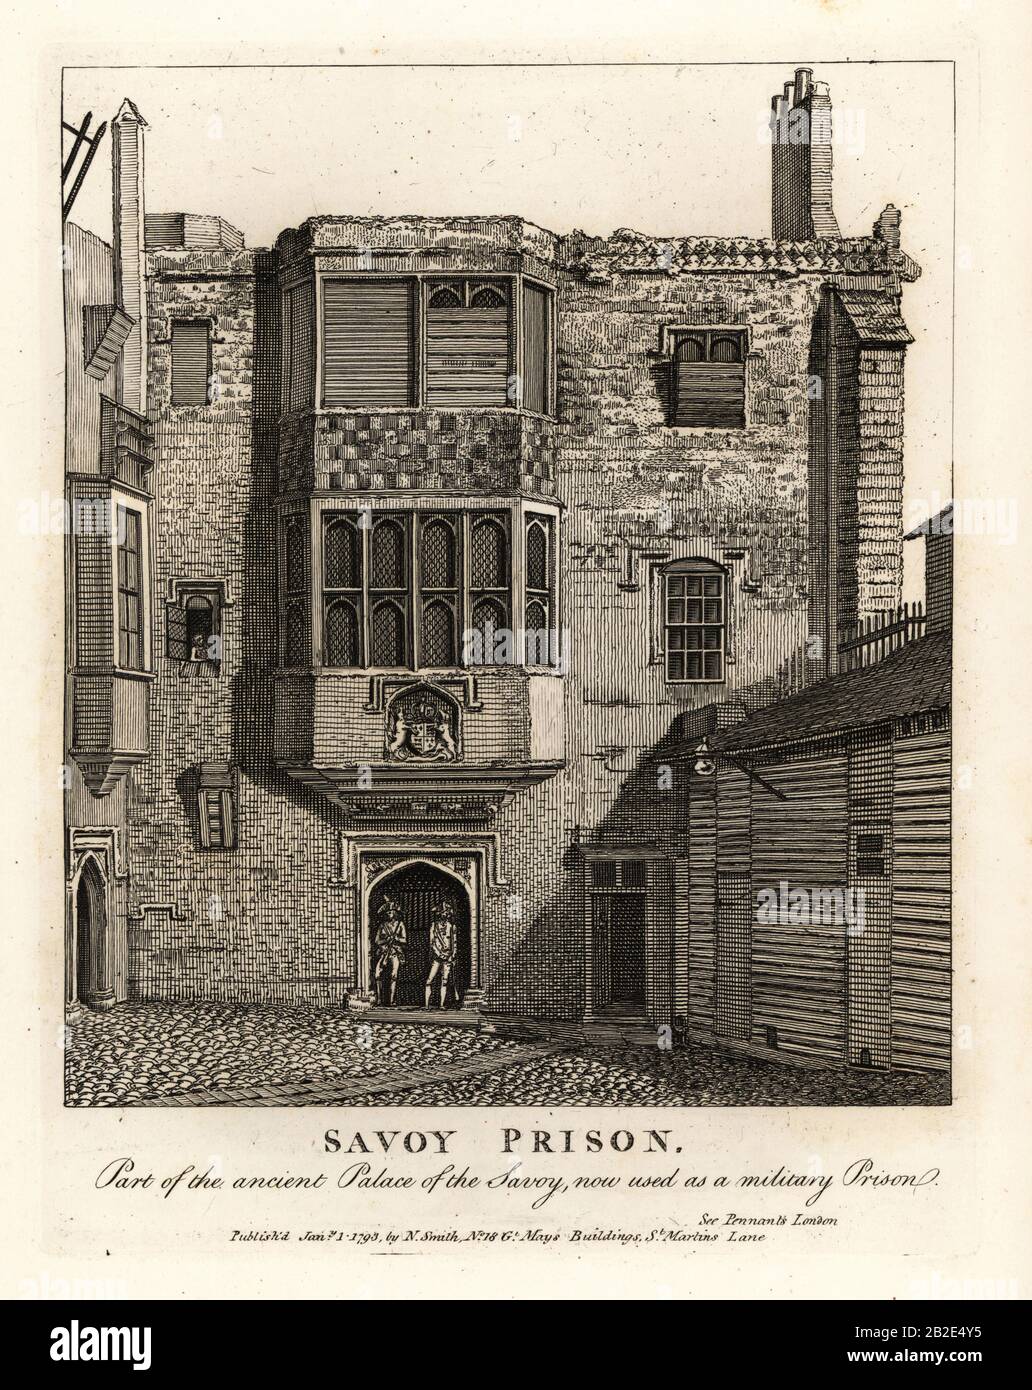 Savoy Prison, part of the ancient Palace of the Savoy, used as a military prison in the 18th century. Copperplate engraving by John Thomas Smith after original drawings by members of the Society of Antiquaries from his J.T. Smith’s Antiquities of London and its Environs, J. Sewell, R. Folder, J. Simco, London, 1793. Stock Photo